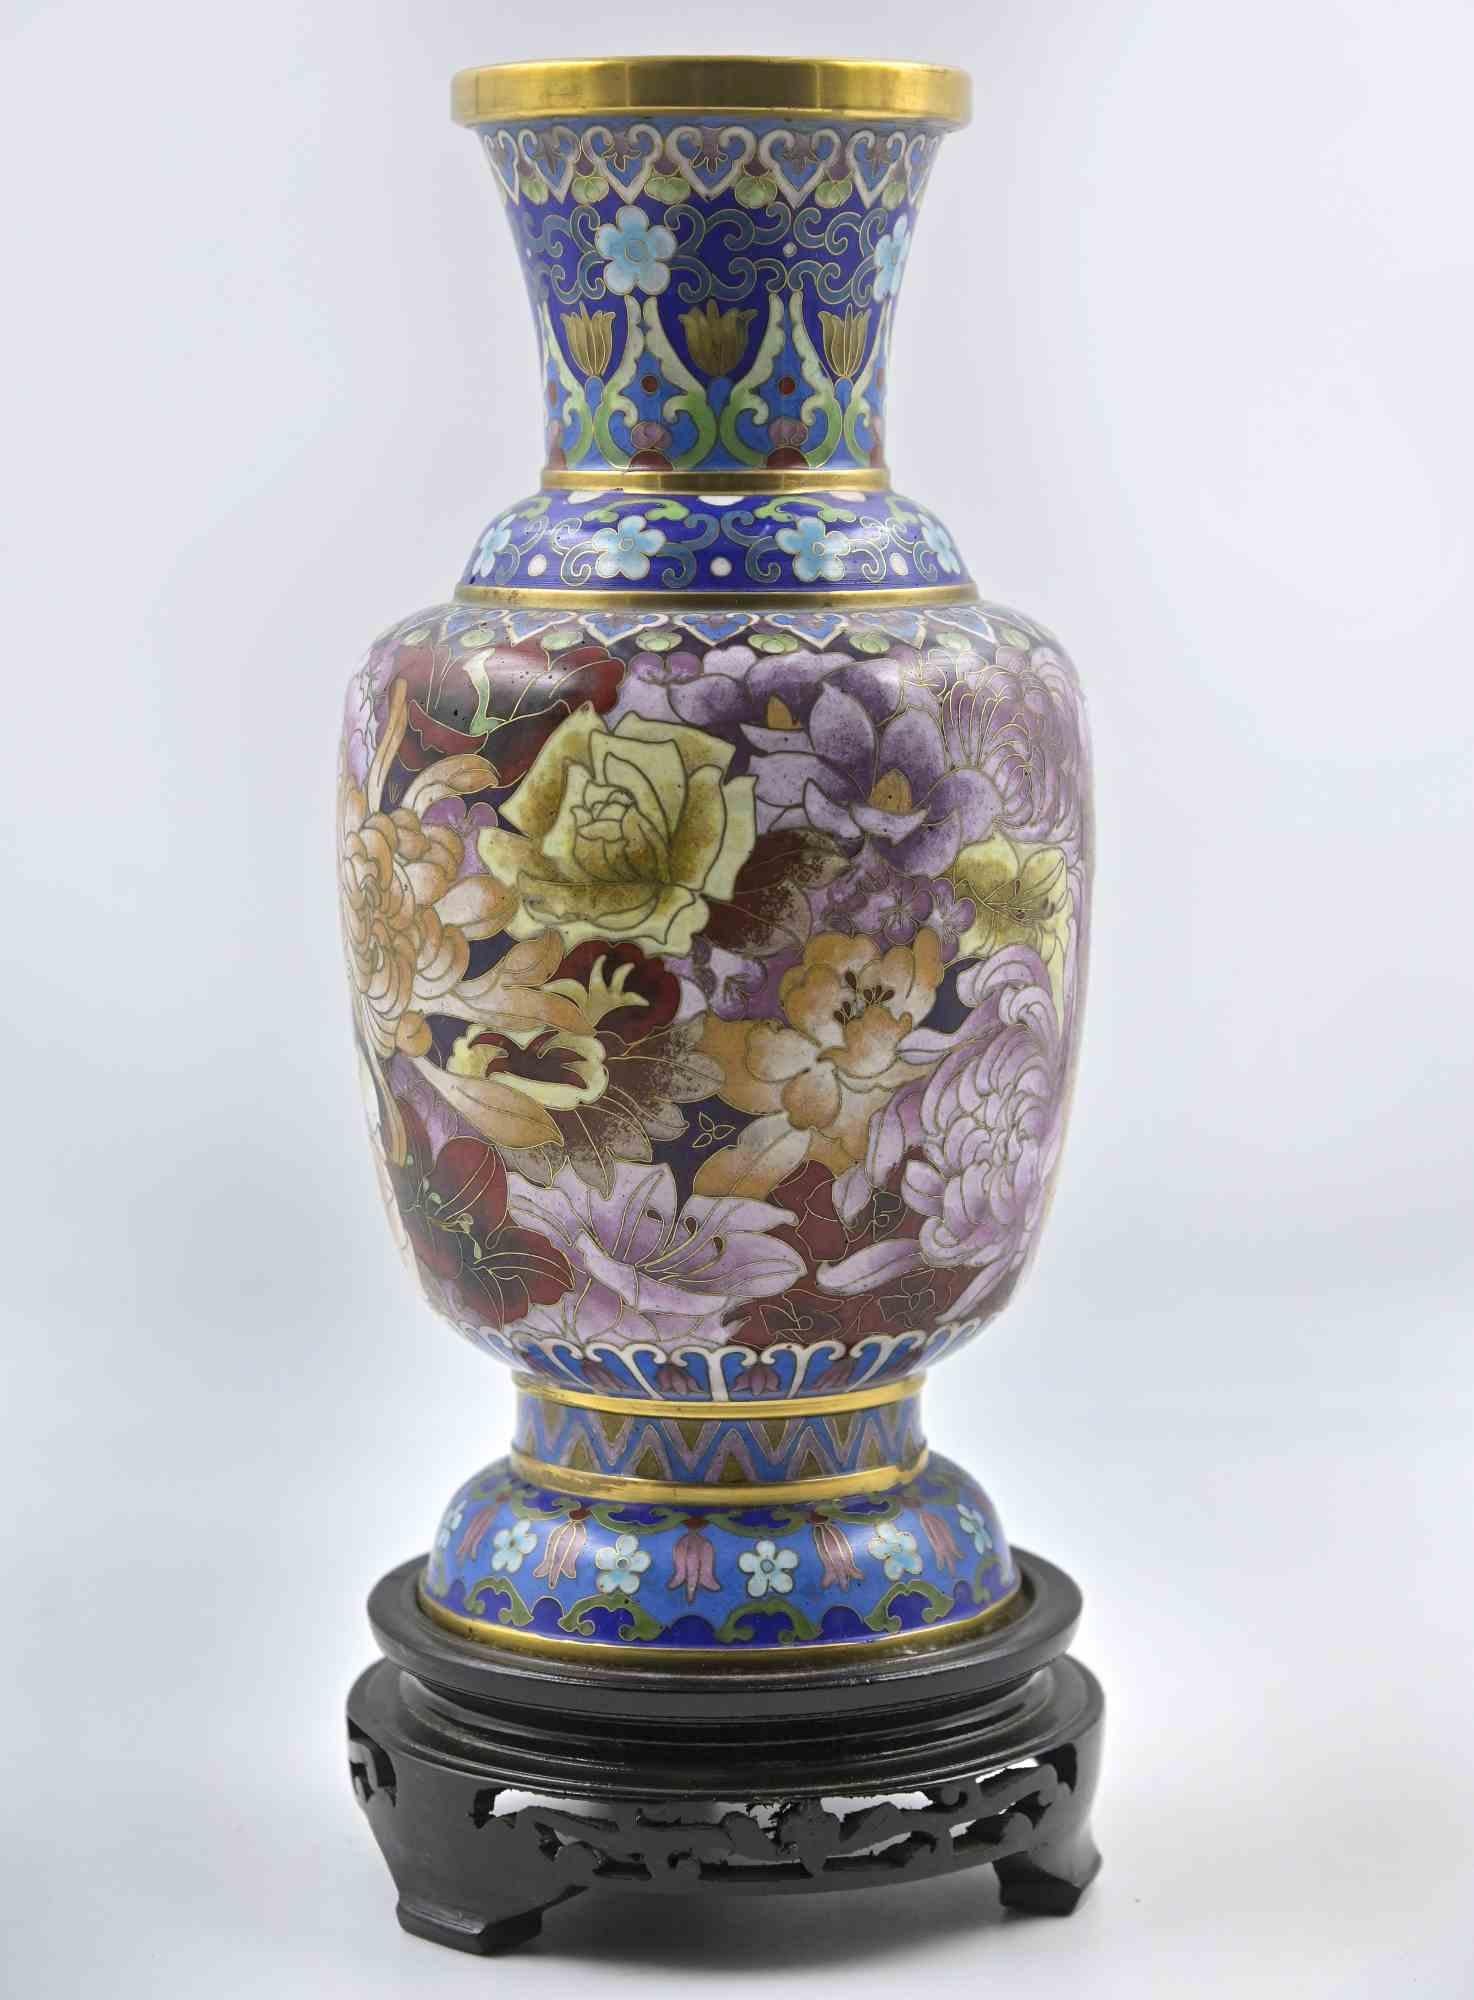 Vintage Chinese vase early 20th century

Ceramic and metal on a wooden base.

Measures: 31x13 cm.